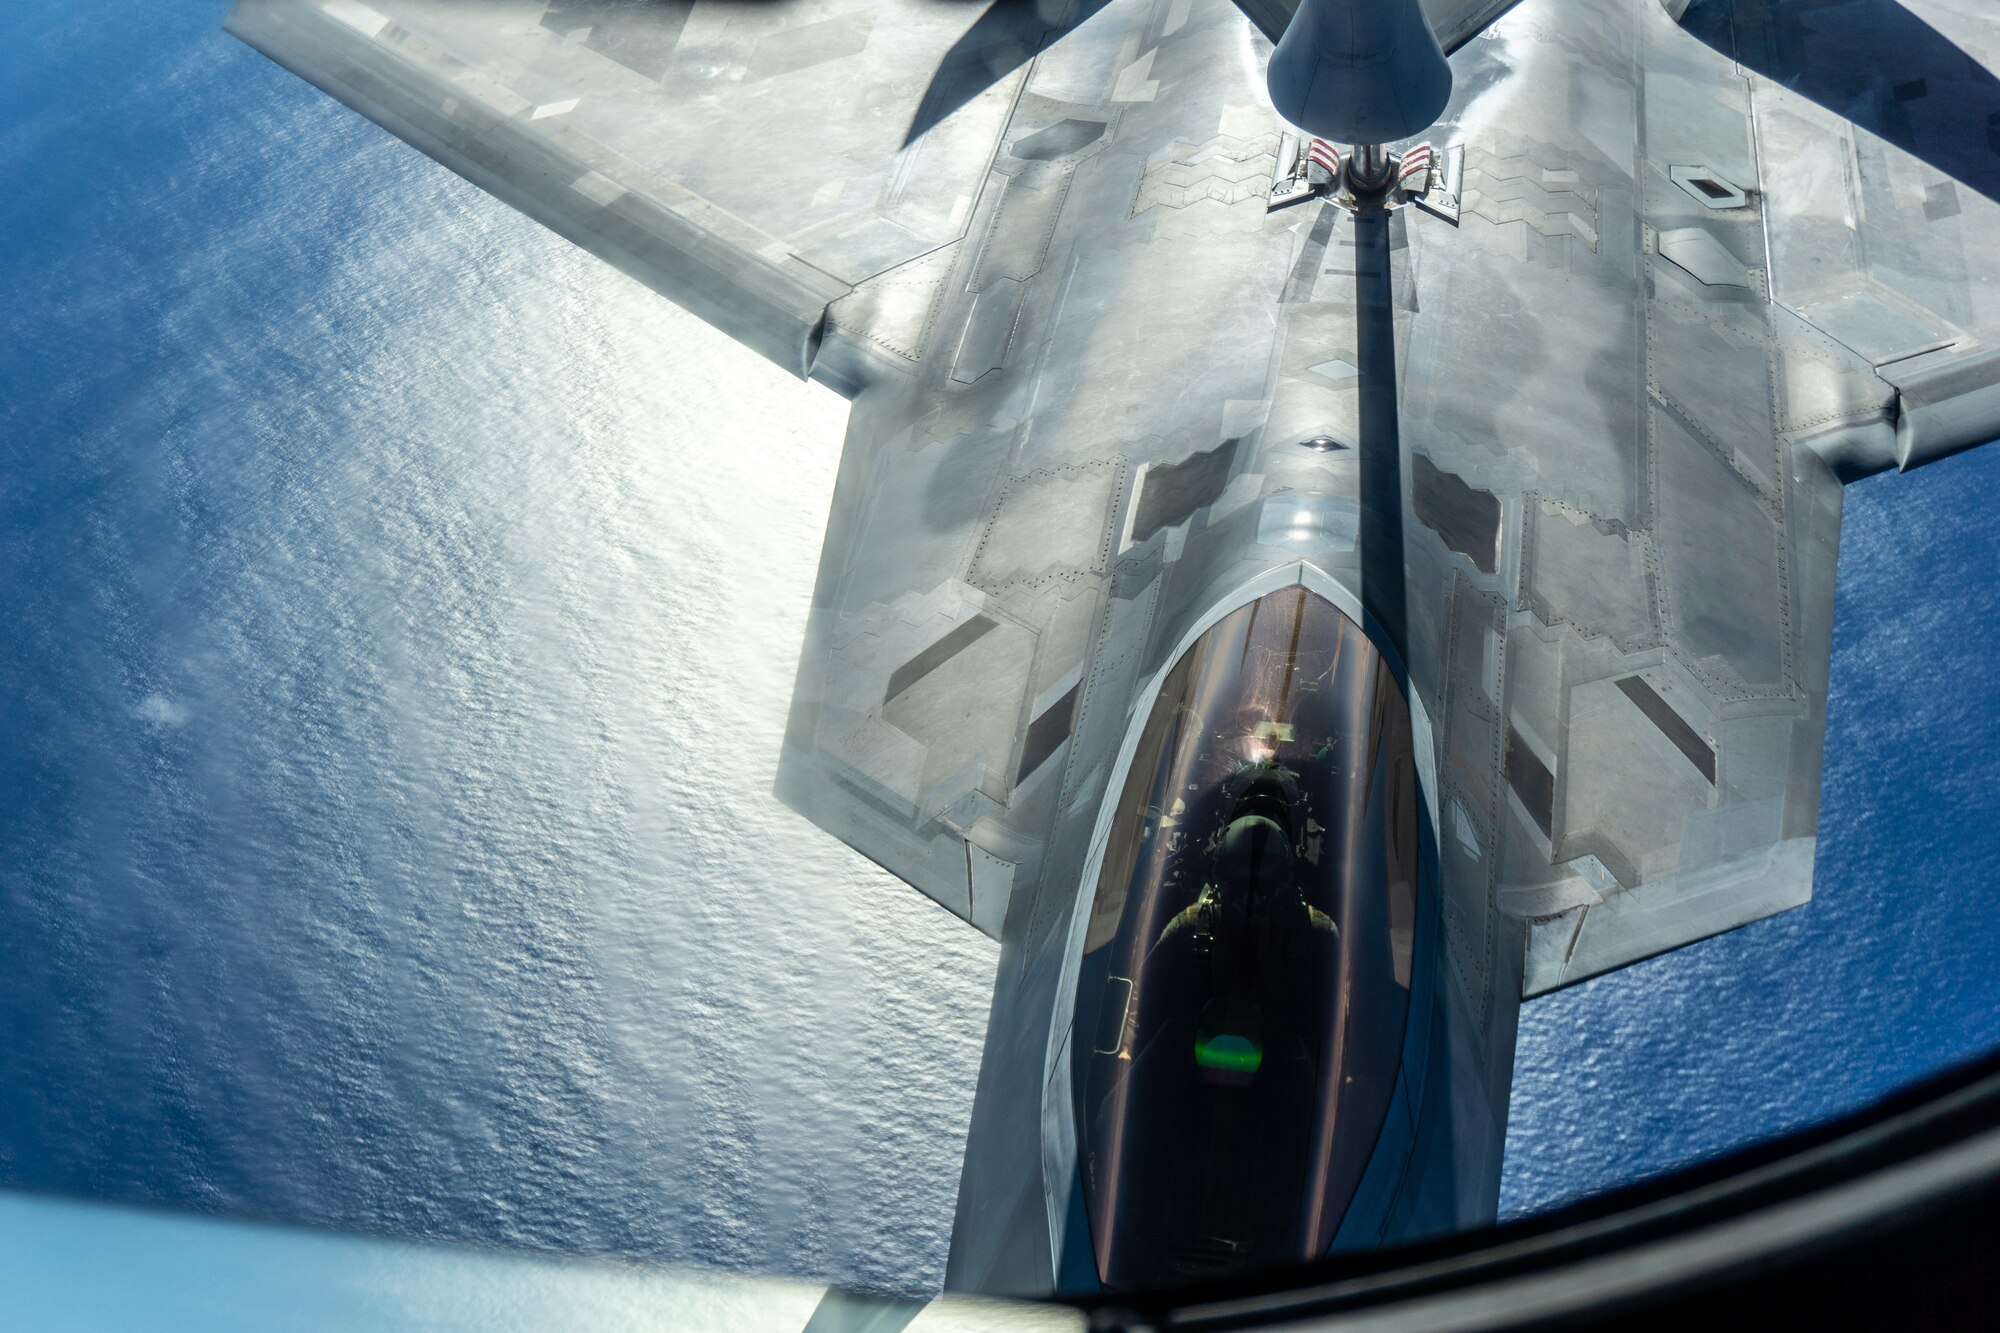 A KC-135 Stratotanker operated by Team Hickam refuels an F-22 Raptor during a routine training mission over the Hawaiian Islands, May 14, 2020.